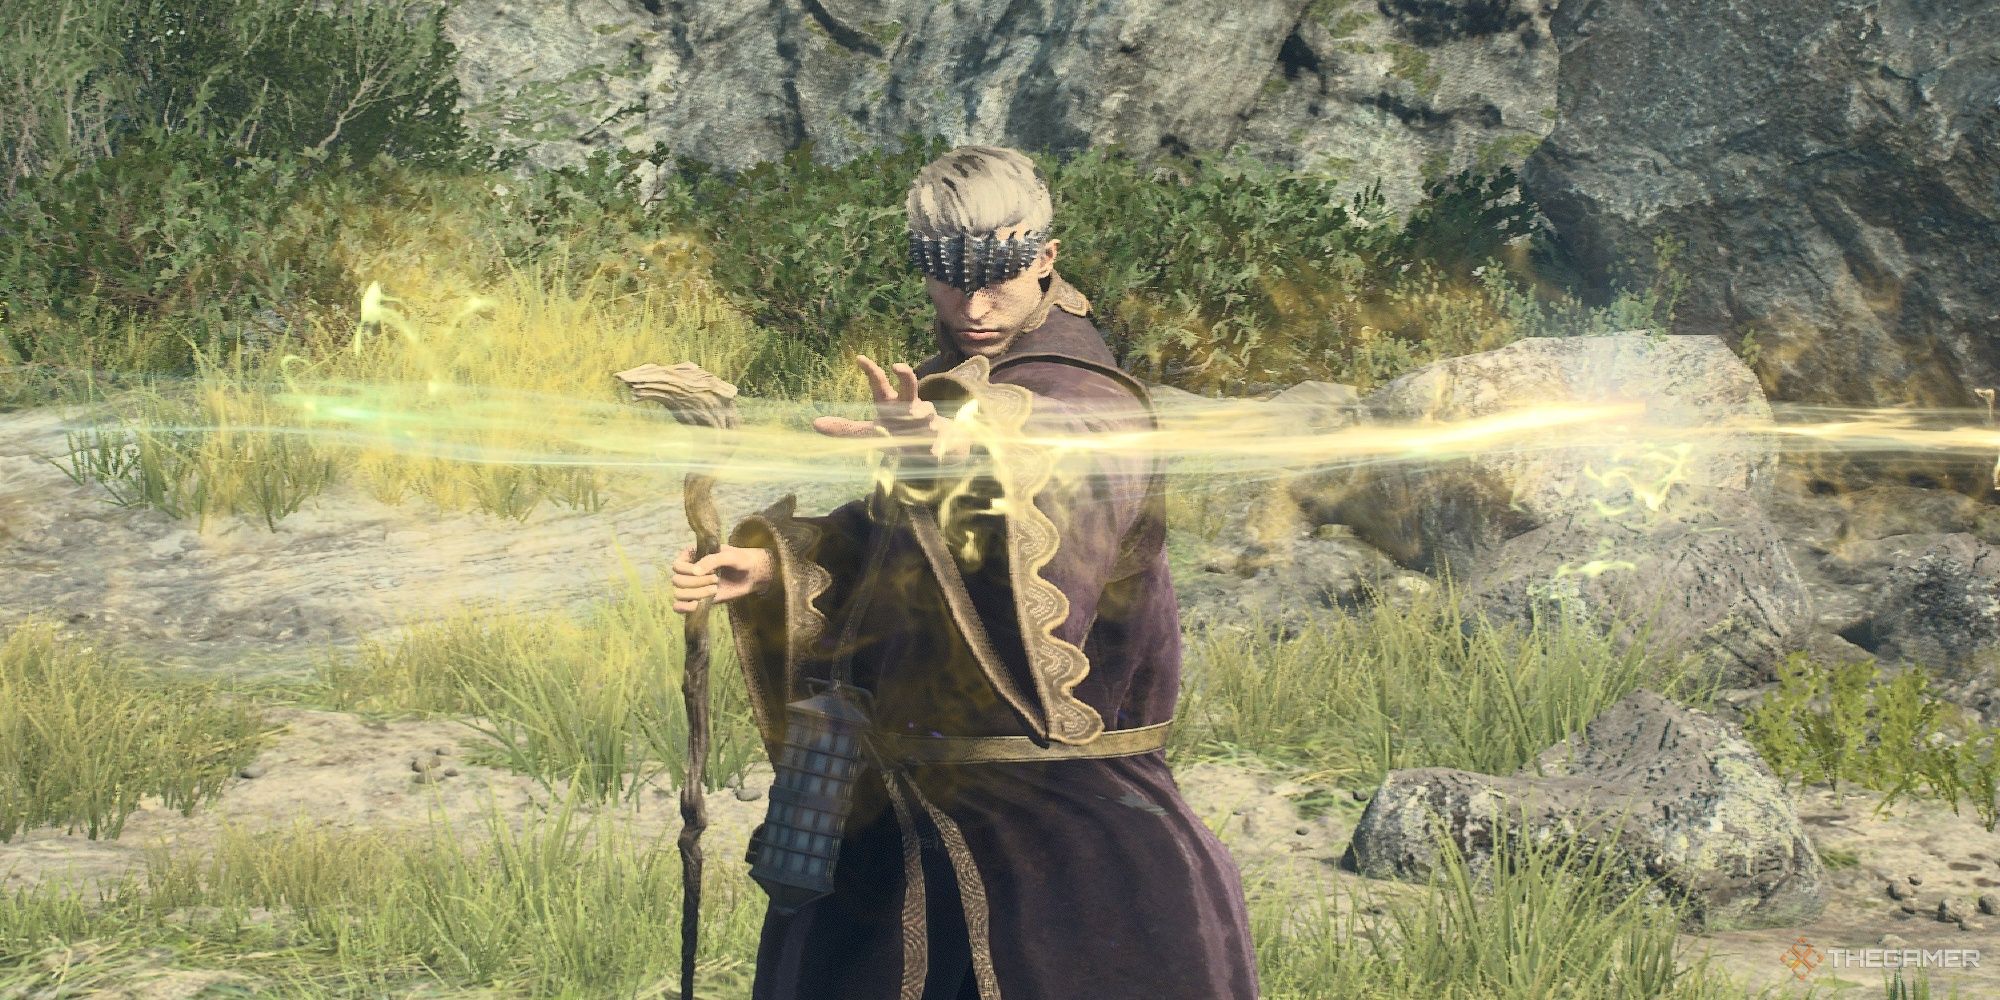 The Arisen casting a spell using the Mage Vocation in Dragon's Dogma 2.